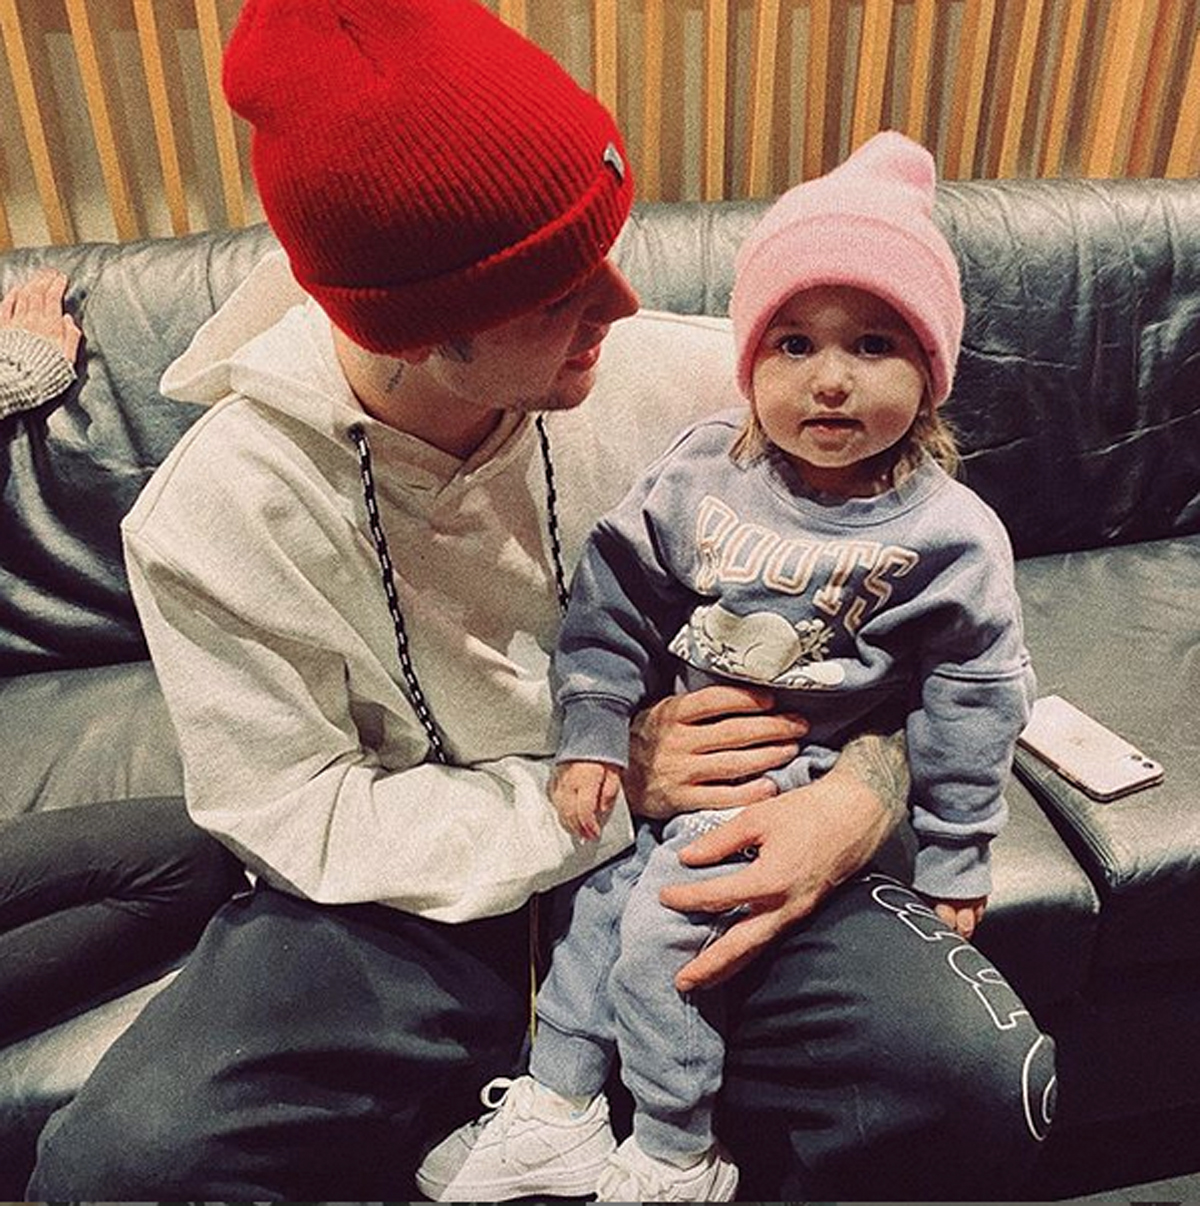 A Different Biebs? Justin Bieber Pens Incredibly Sweet Note To Baby